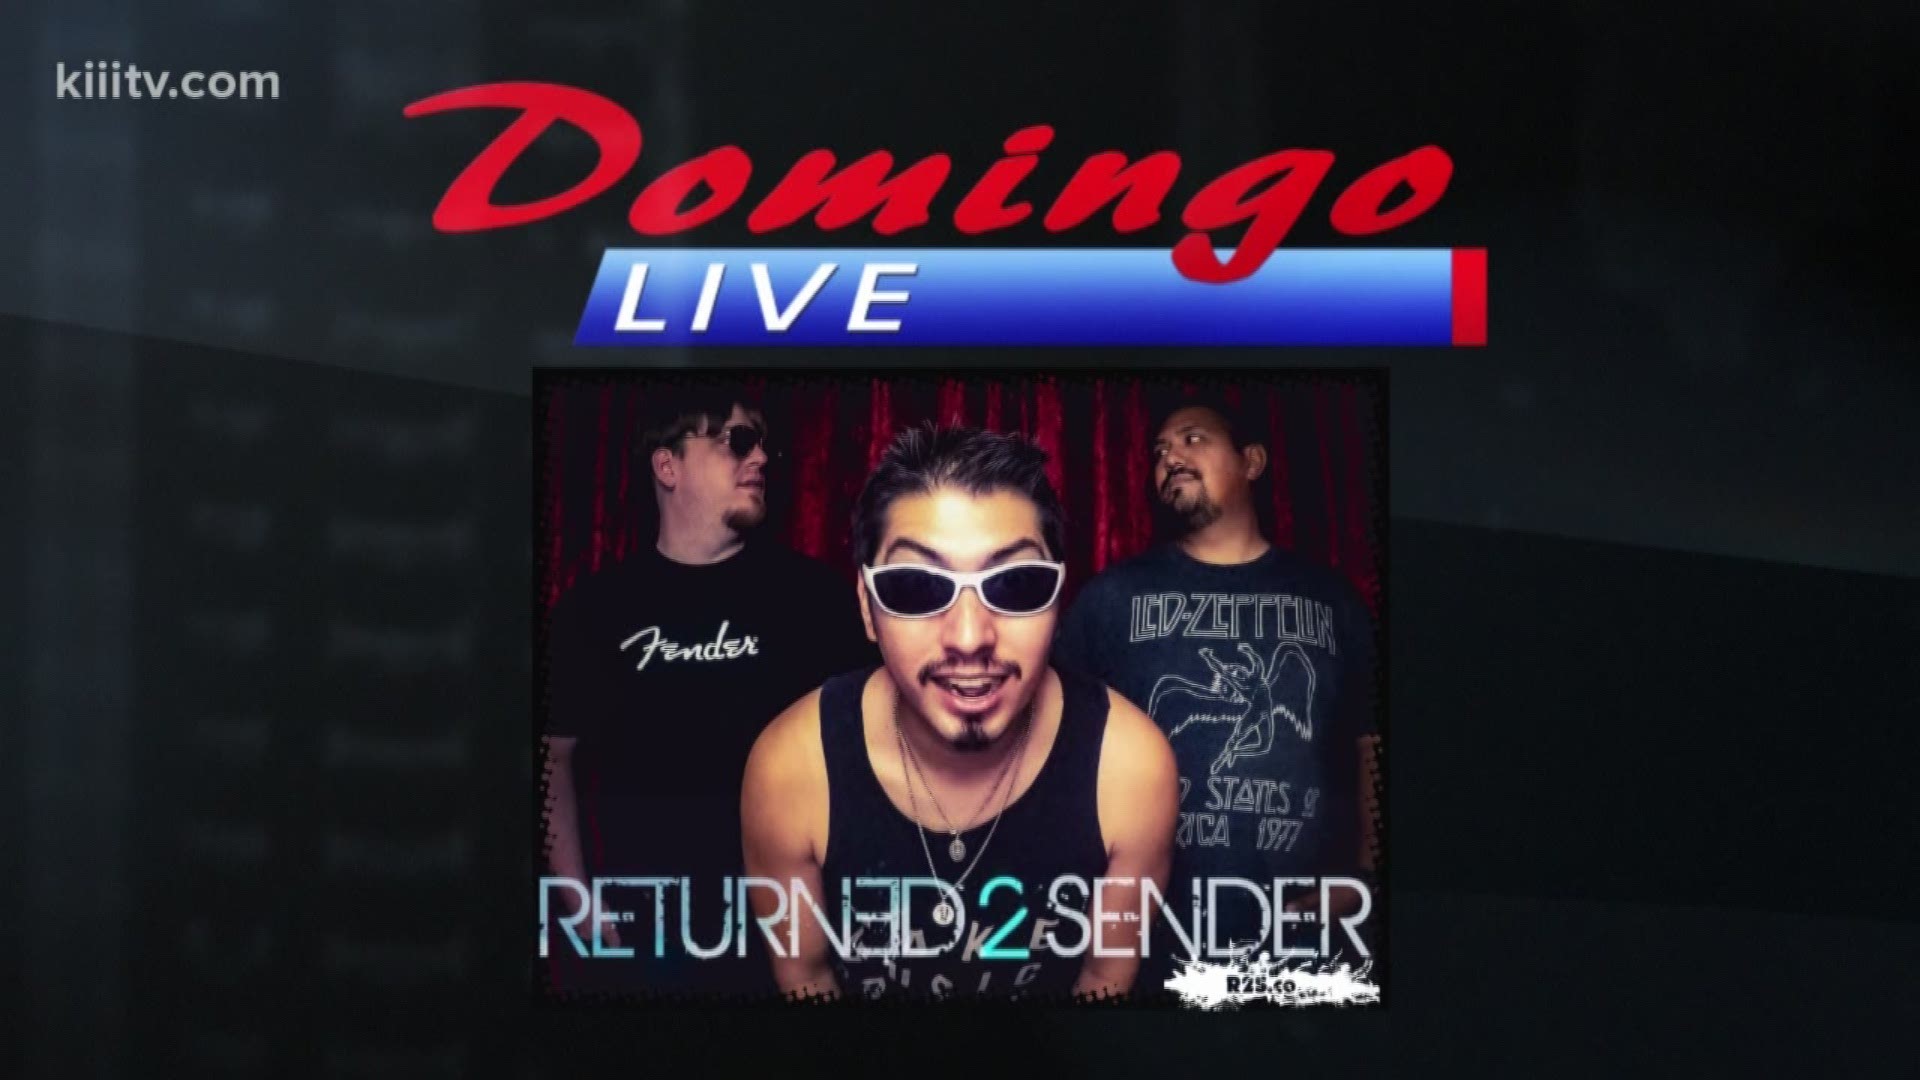 From Corpus Christi, Here is Returned 2 Sender performing one of their original songs "Get You To Move" on Domingo Live!